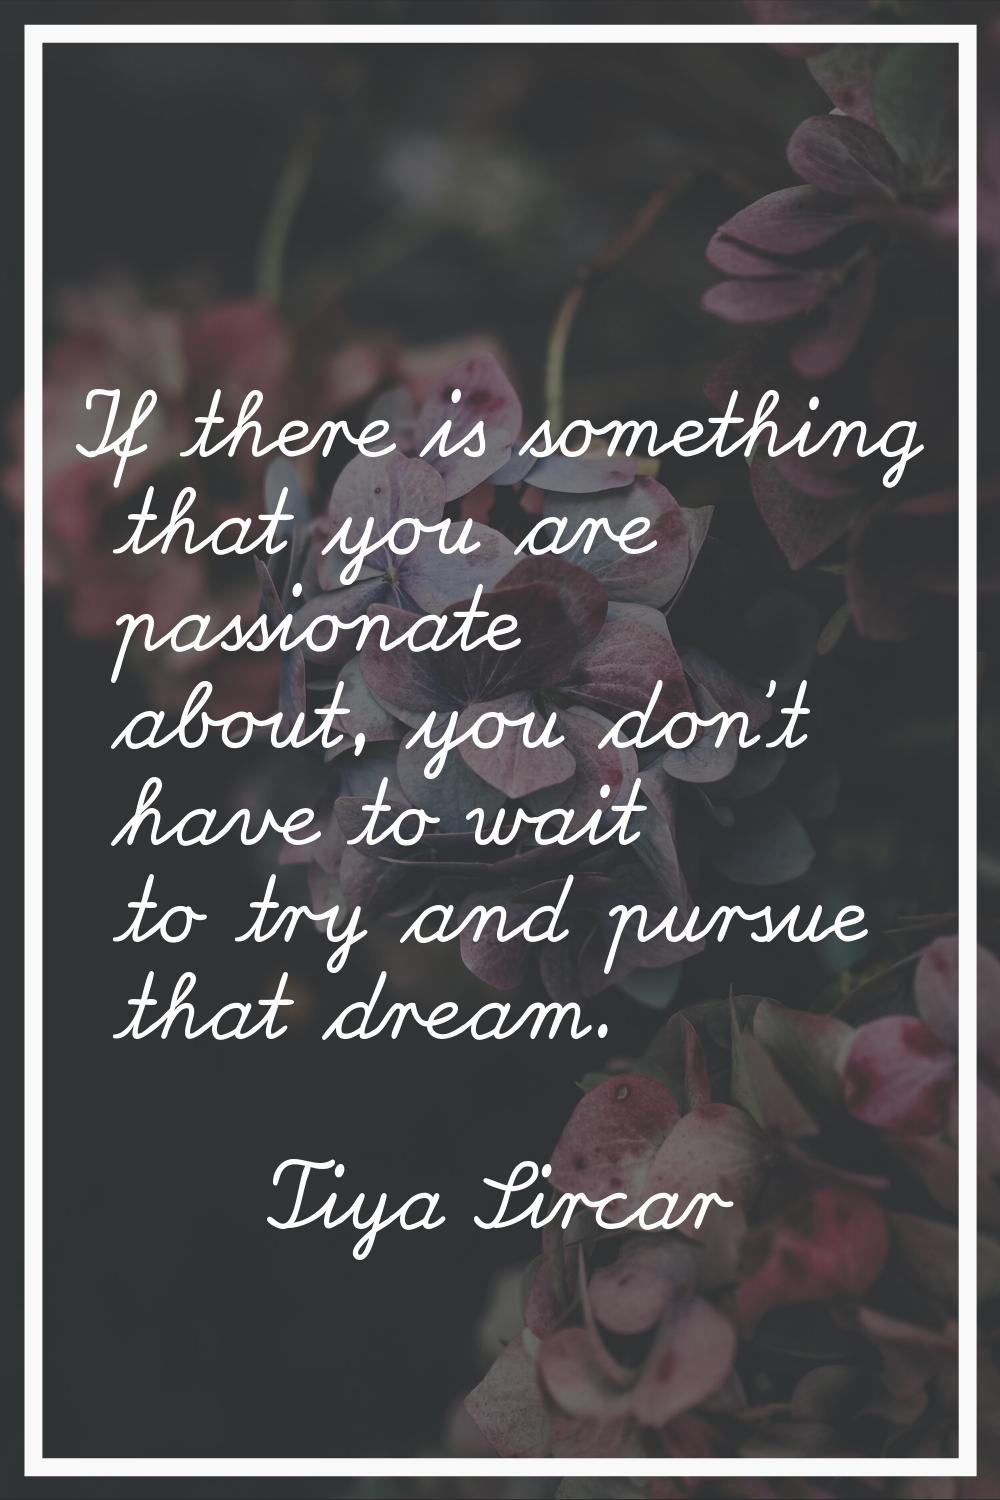 If there is something that you are passionate about, you don't have to wait to try and pursue that 